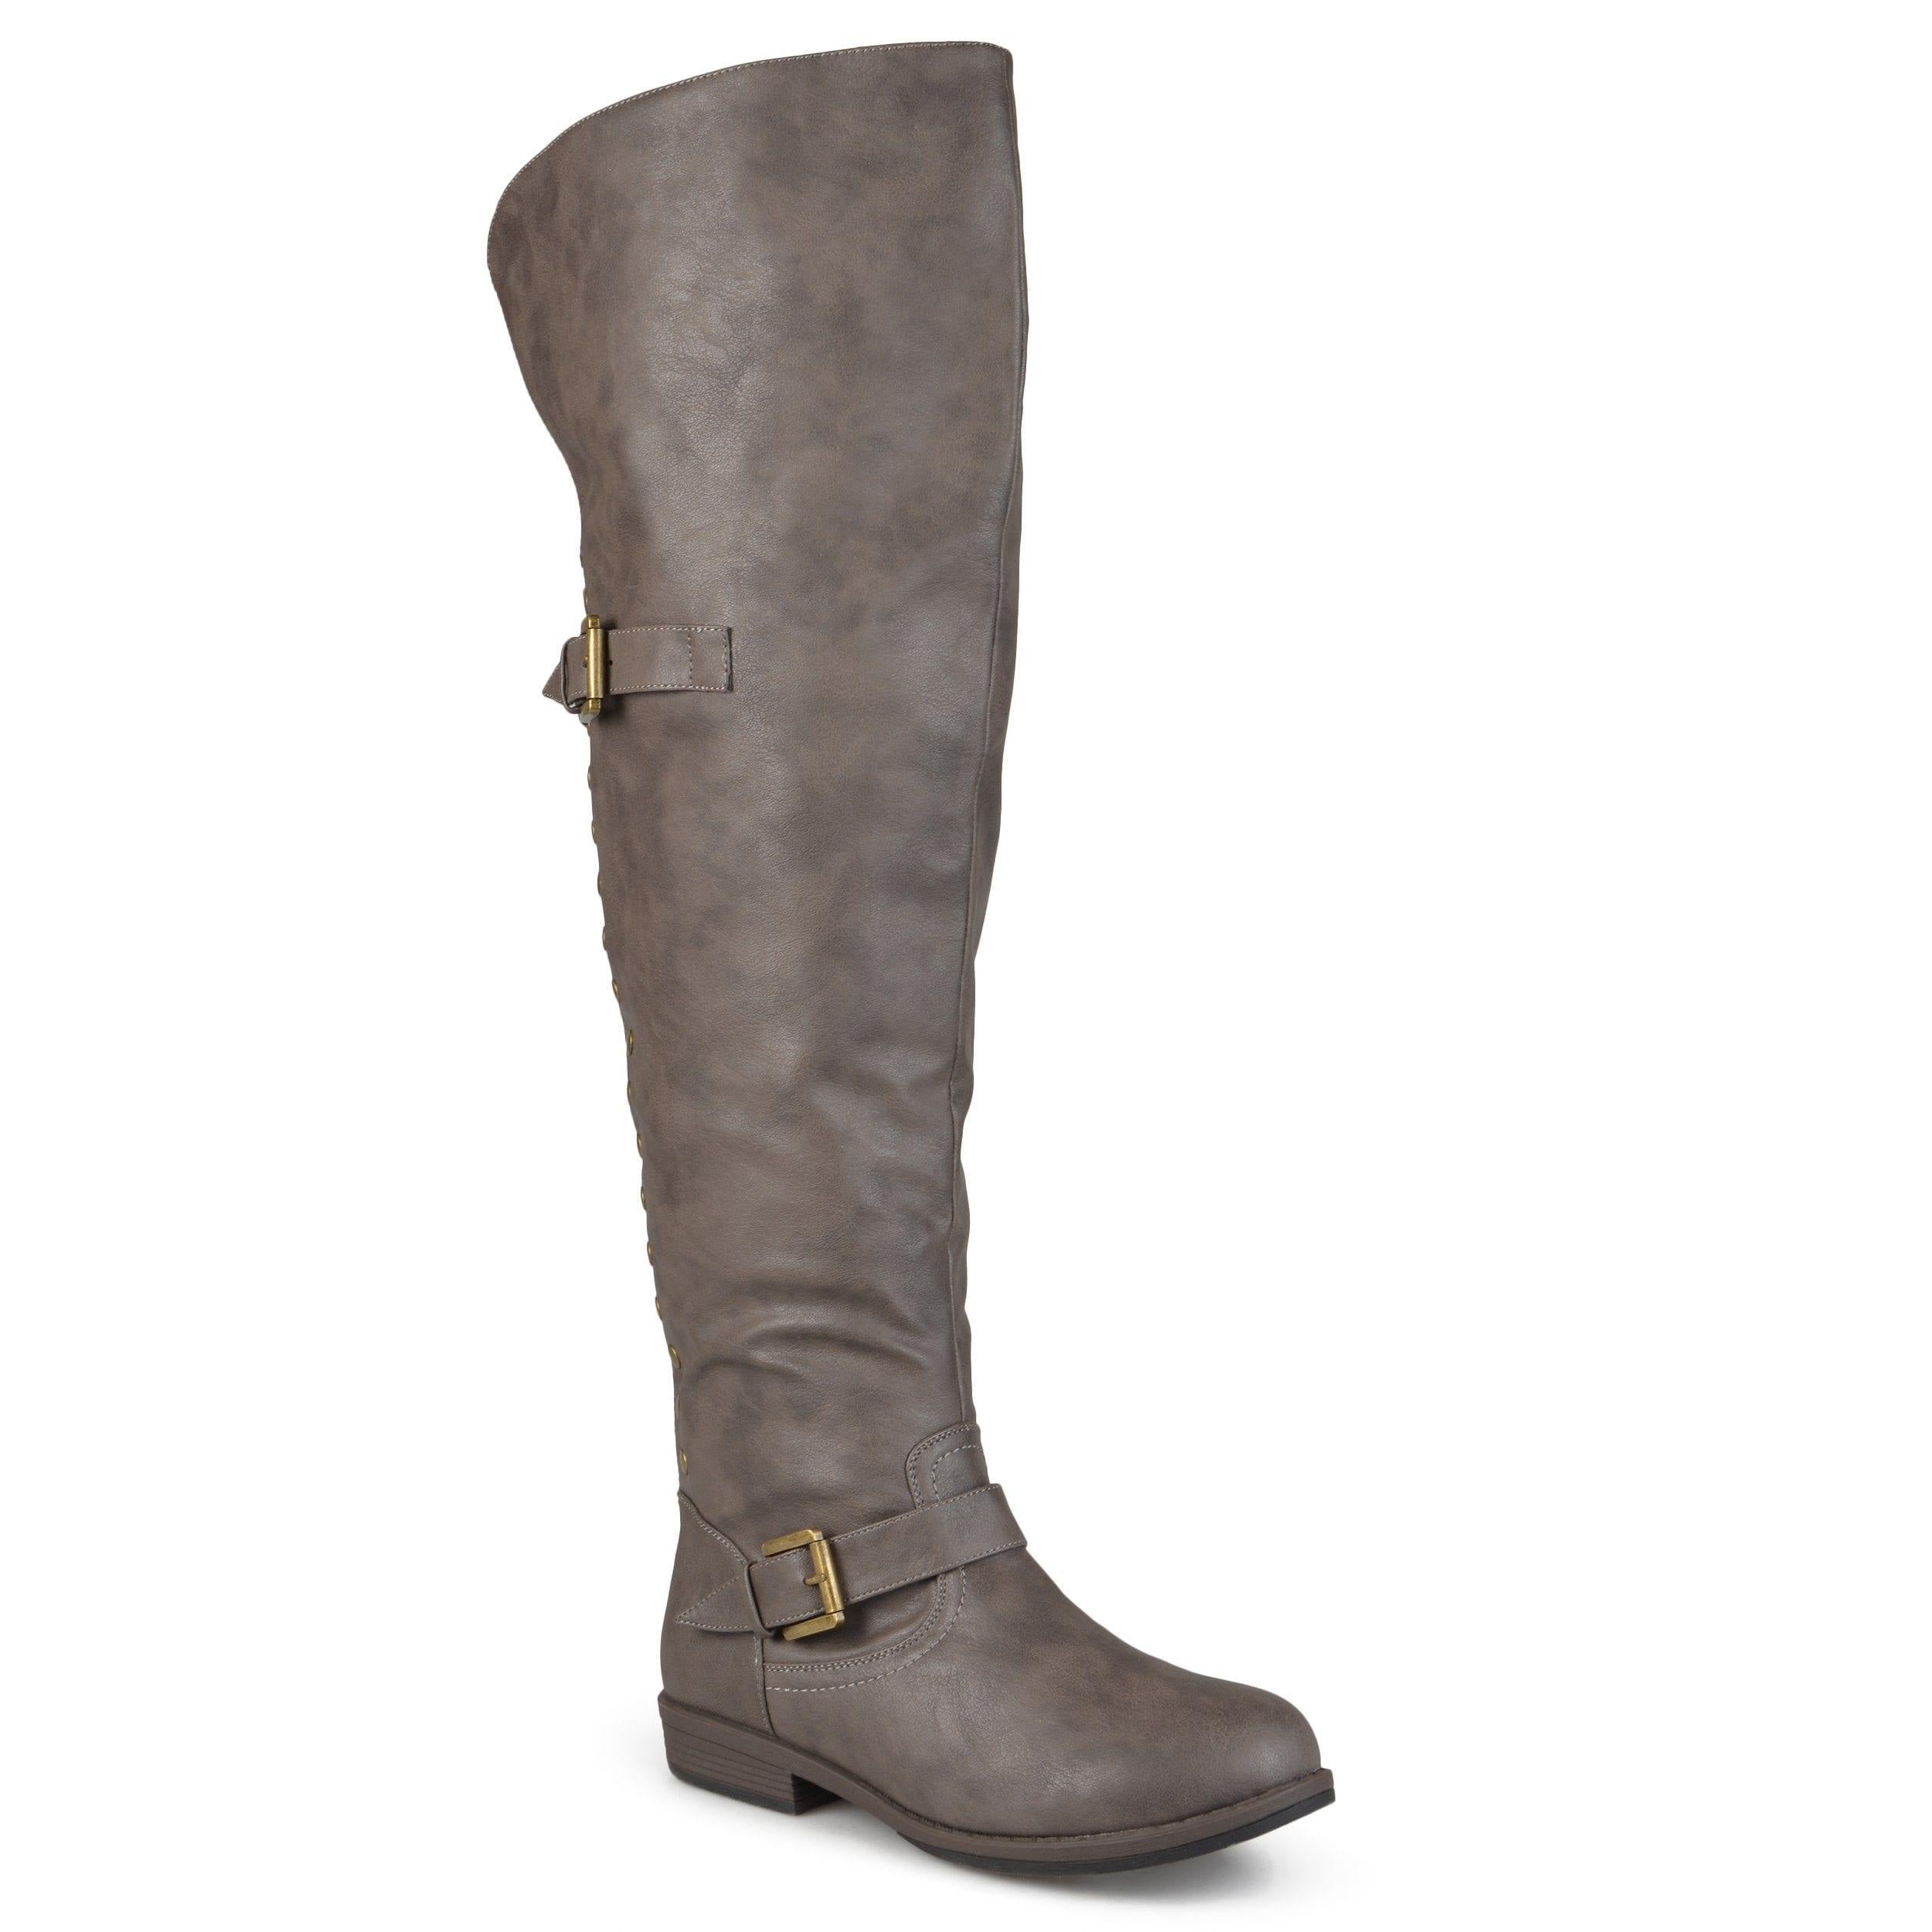 Kane Boot | Women's Over The Knee Boots | Journee Collection